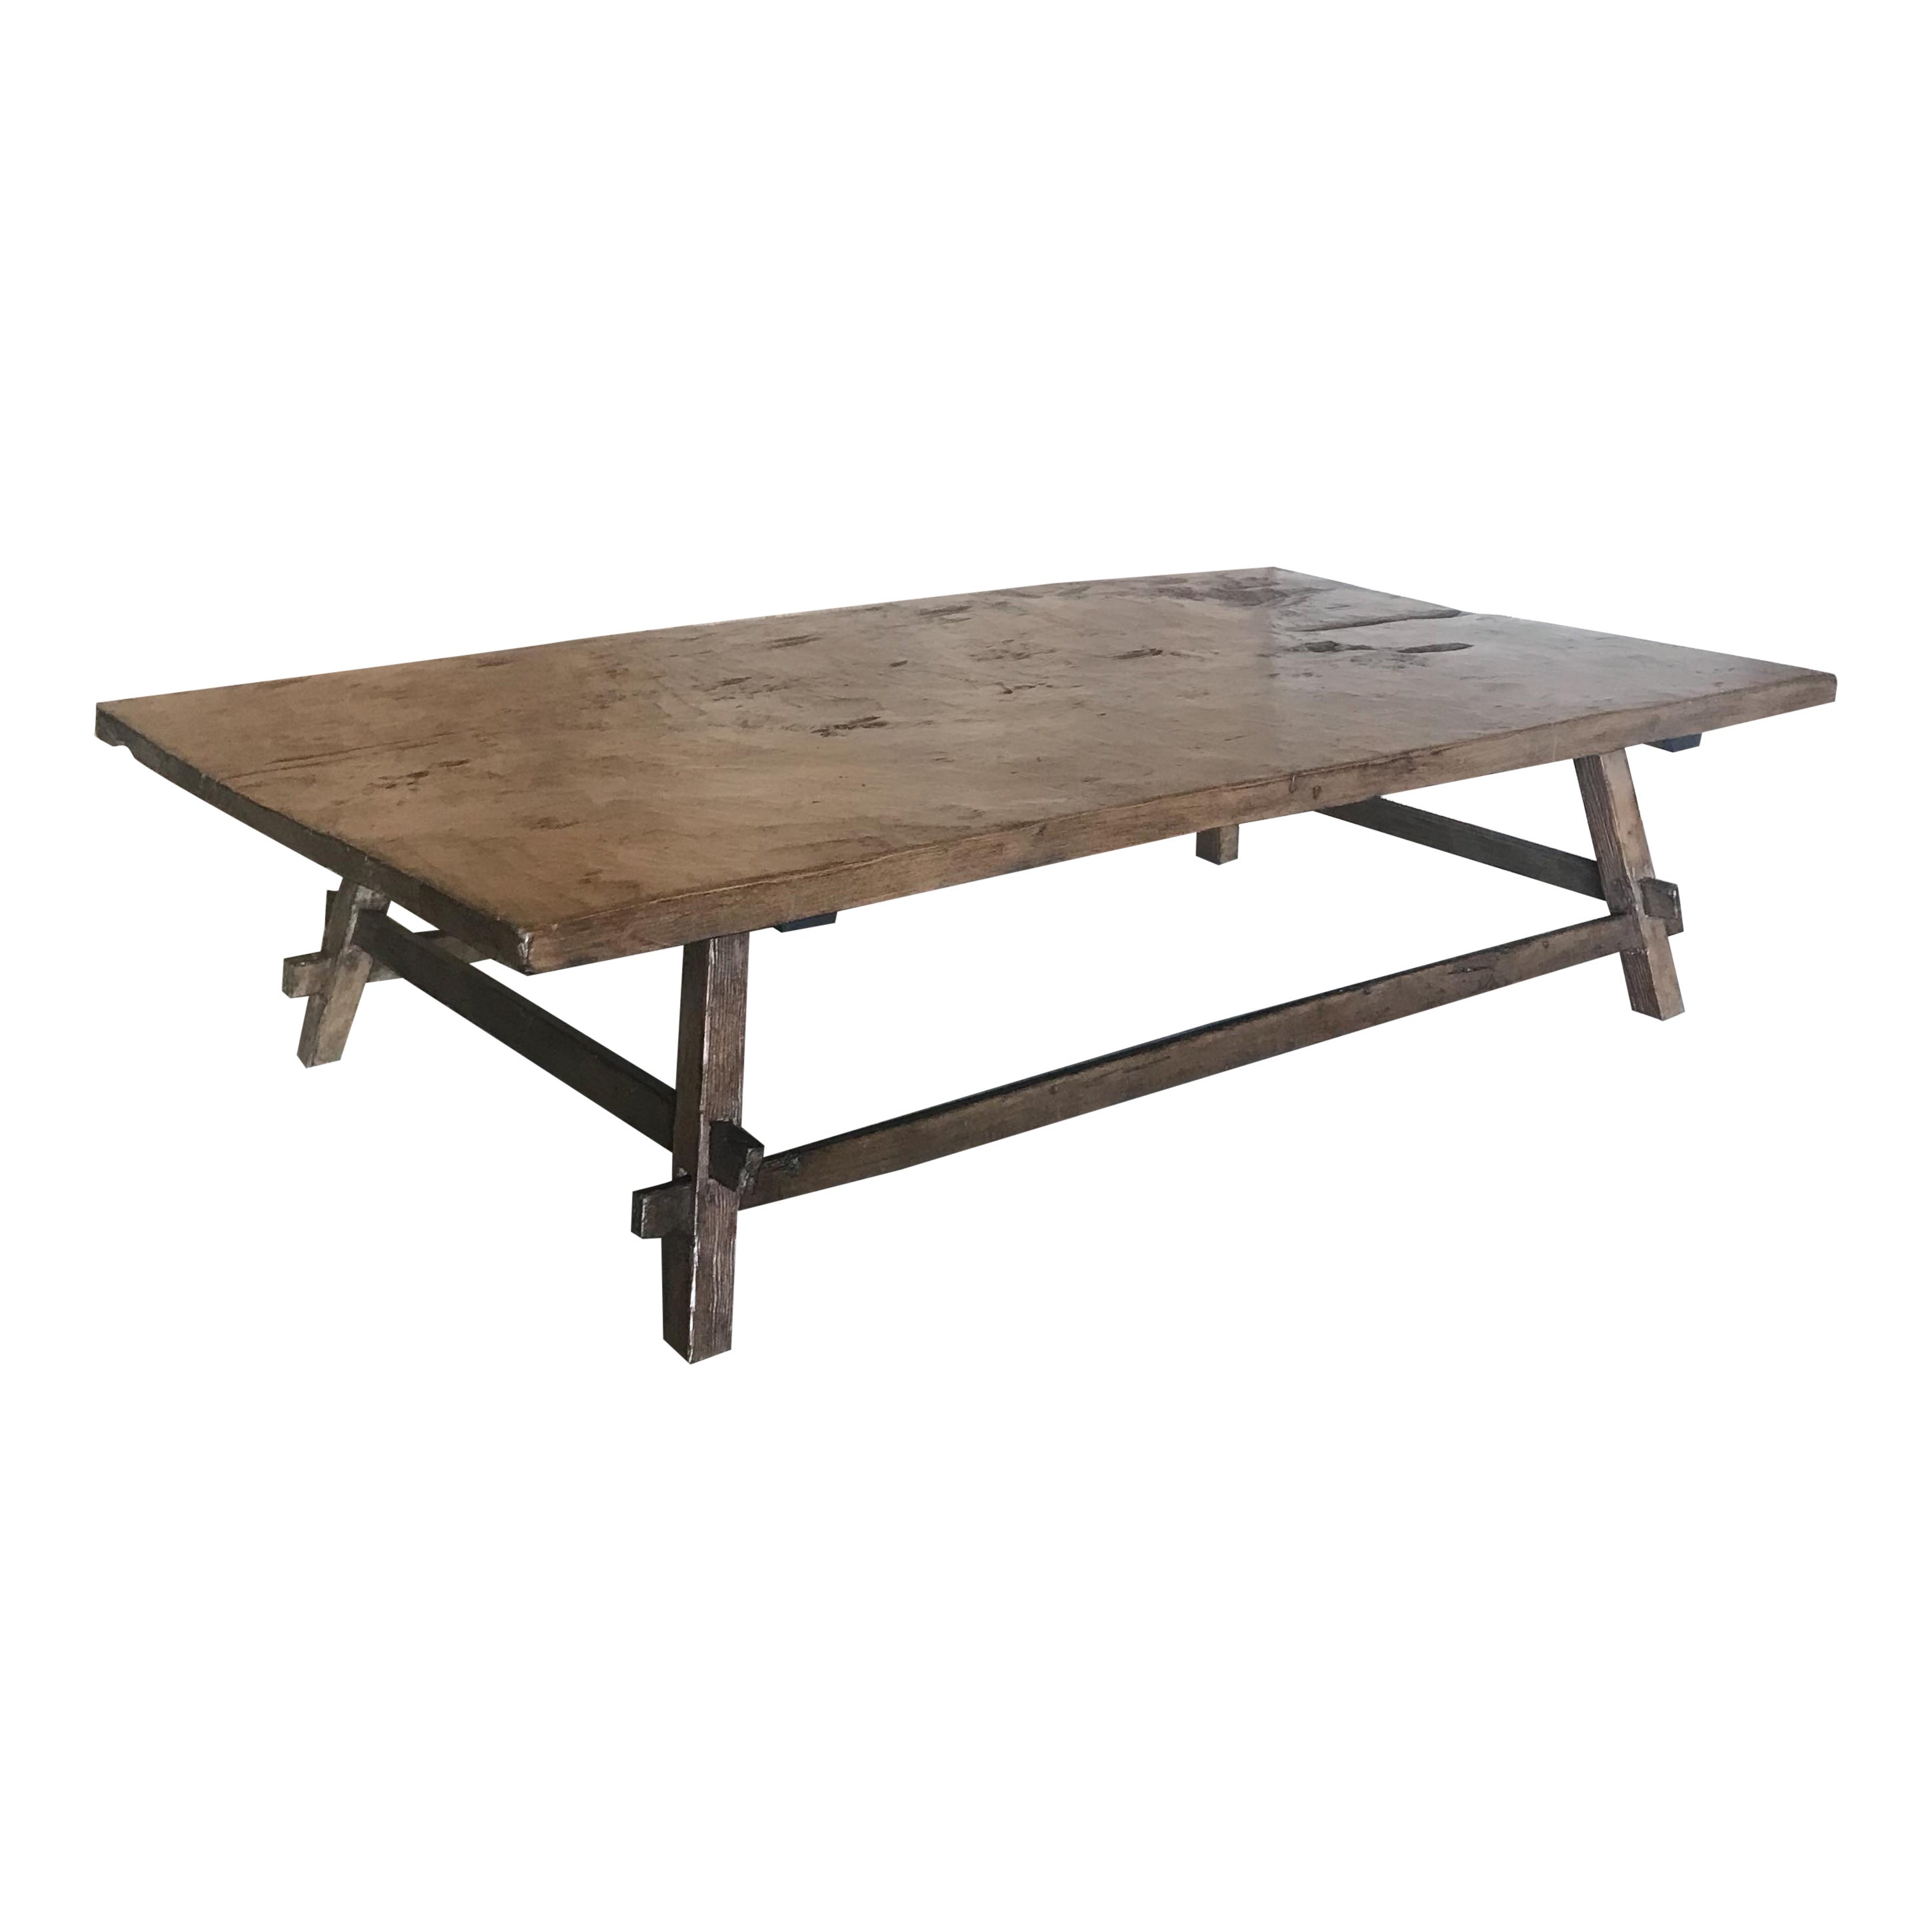 Rustic One Wide Board Coffee Table